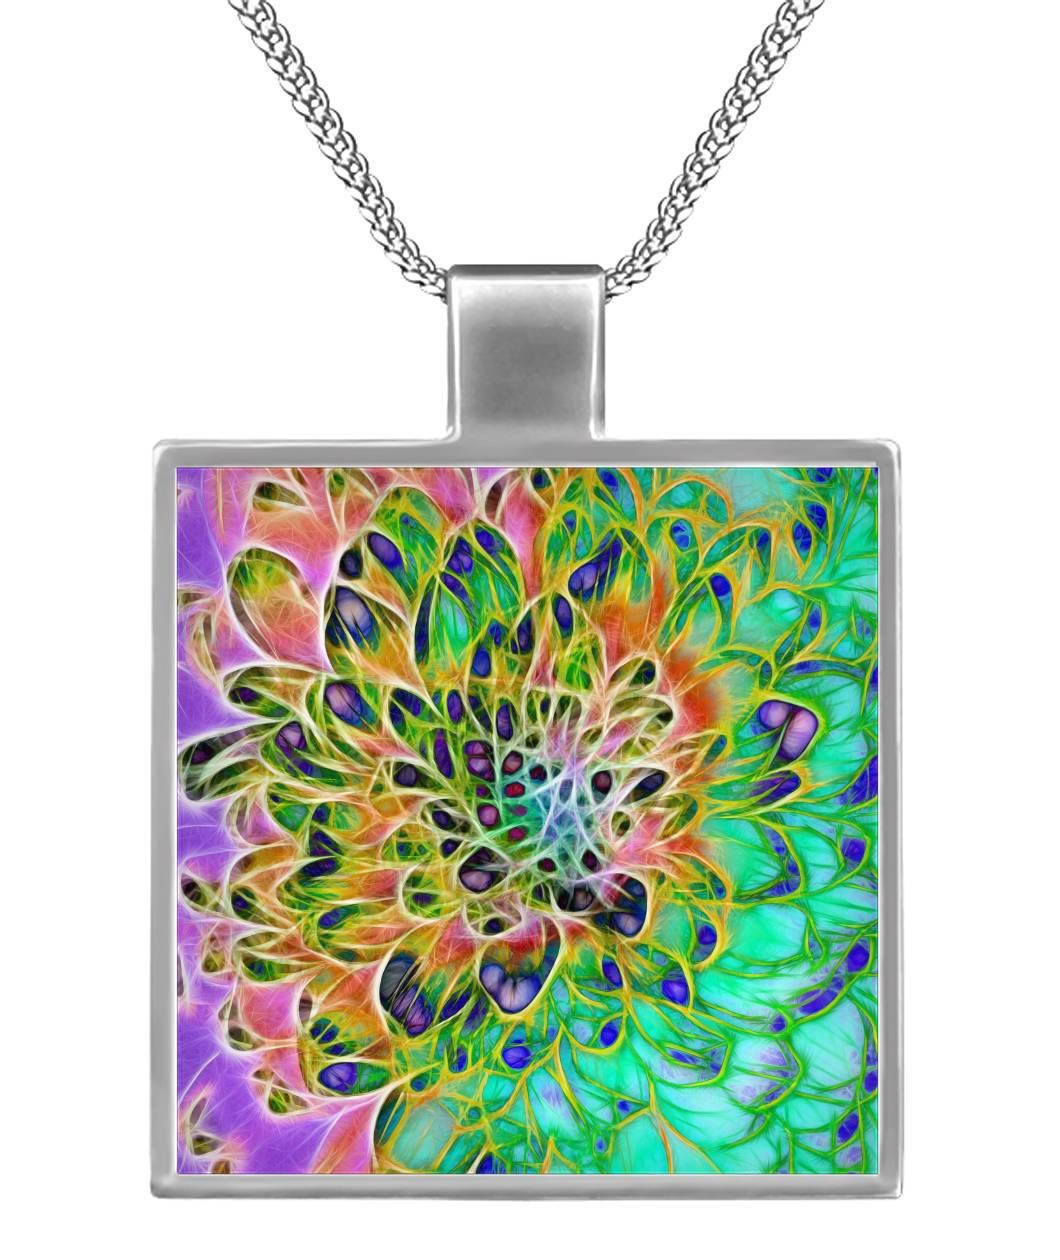 Abstract Chrysanthemum Square Necklace Square Necklace